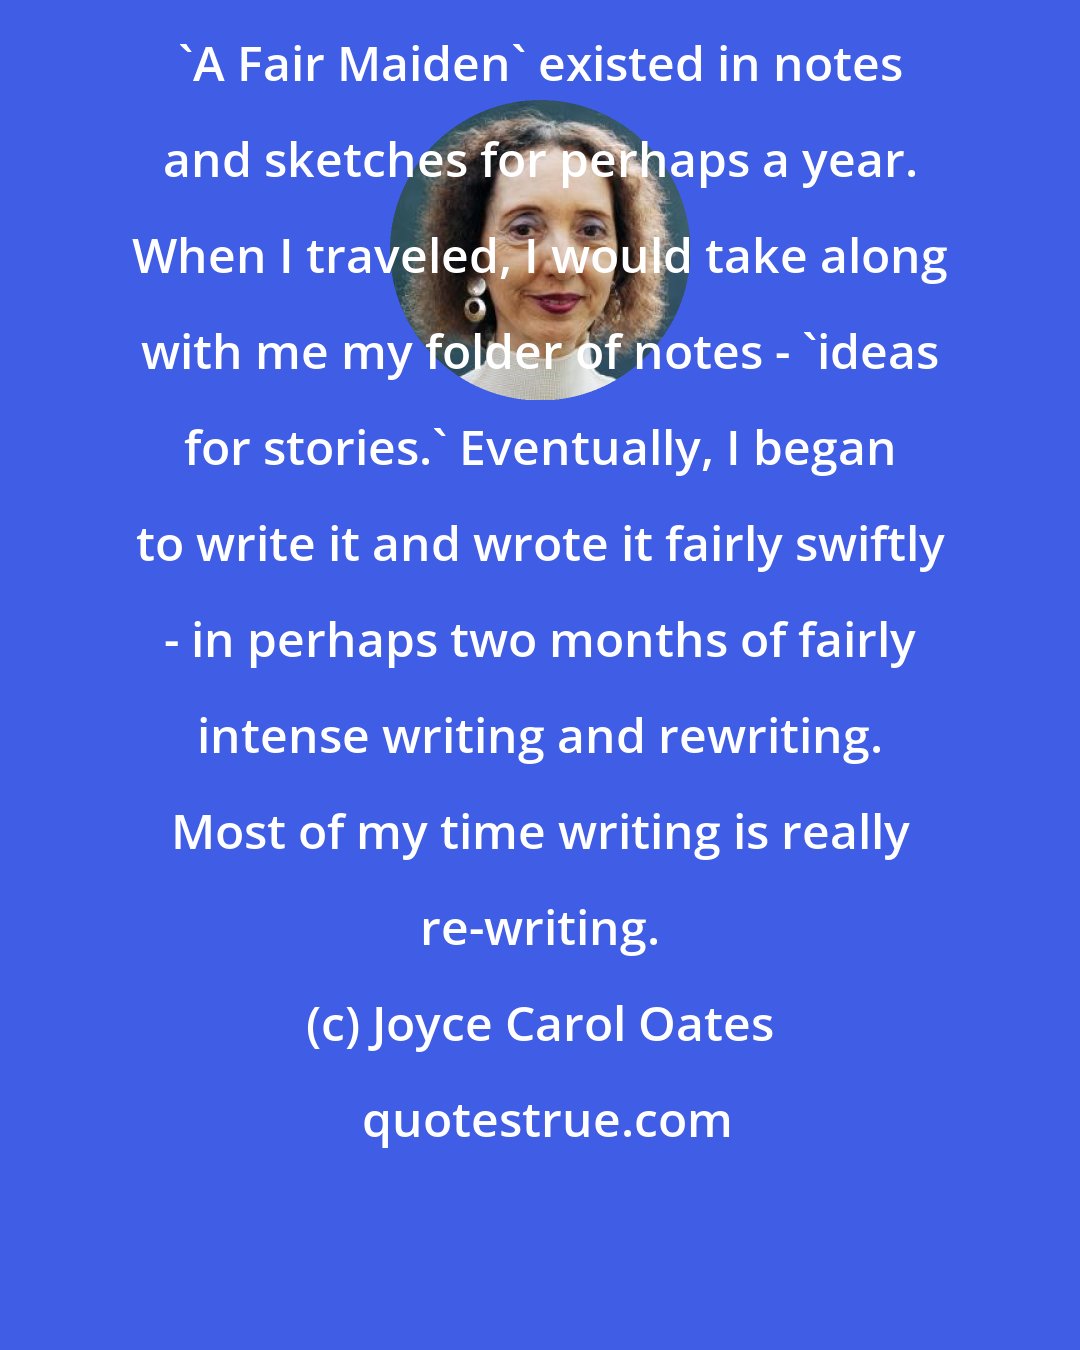 Joyce Carol Oates: 'A Fair Maiden' existed in notes and sketches for perhaps a year. When I traveled, I would take along with me my folder of notes - 'ideas for stories.' Eventually, I began to write it and wrote it fairly swiftly - in perhaps two months of fairly intense writing and rewriting. Most of my time writing is really re-writing.